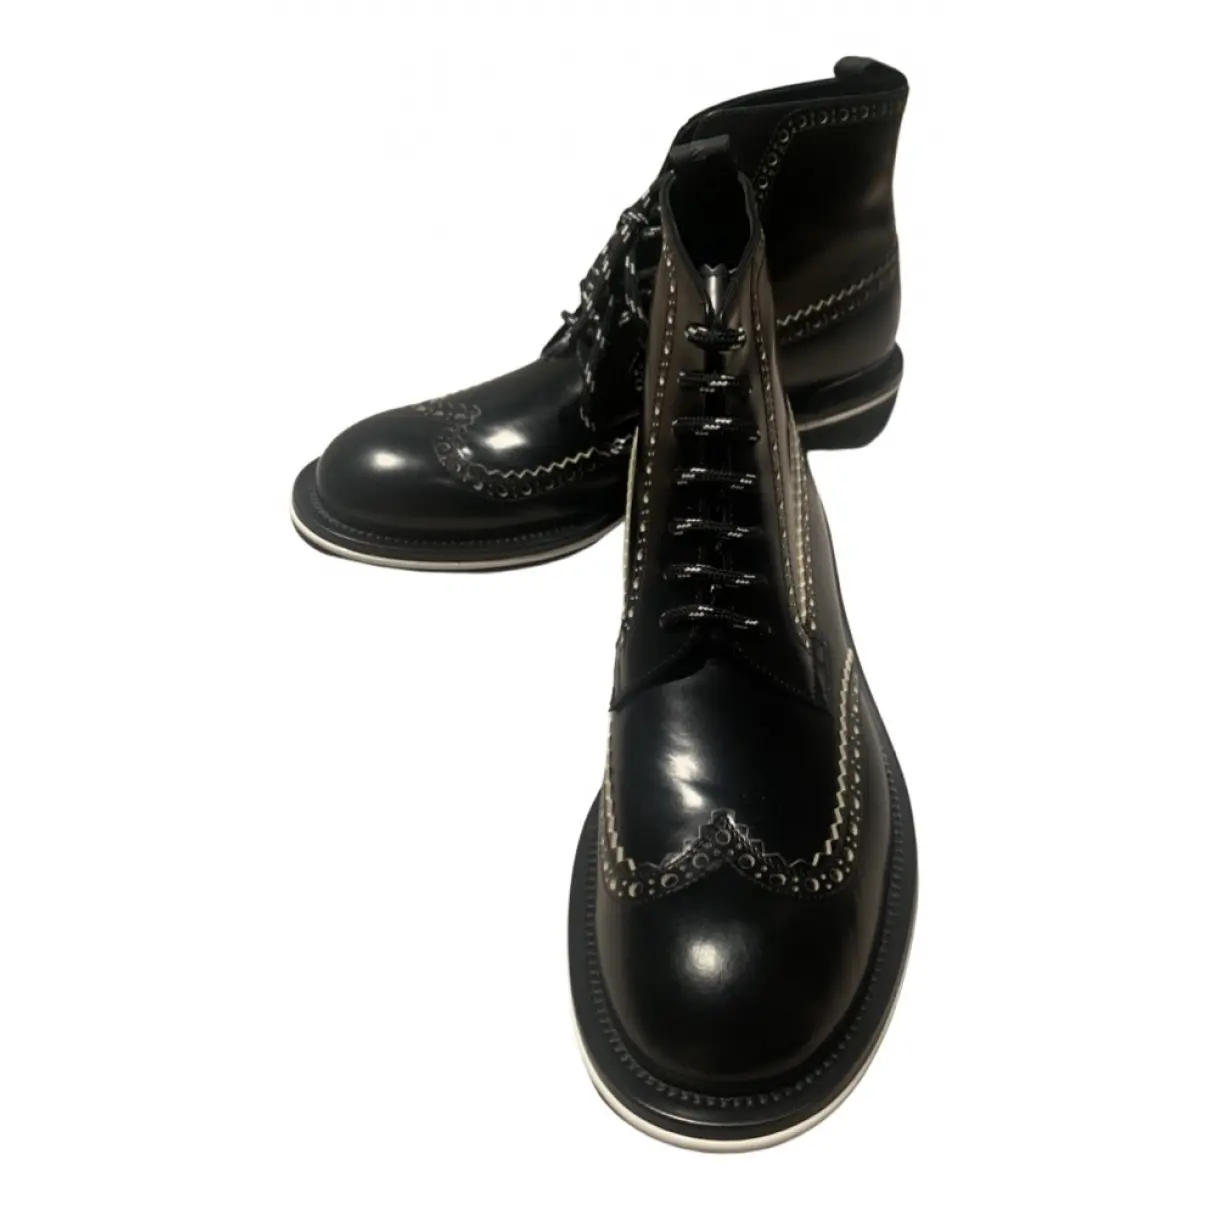 Patent leather boots Alexander McQueen